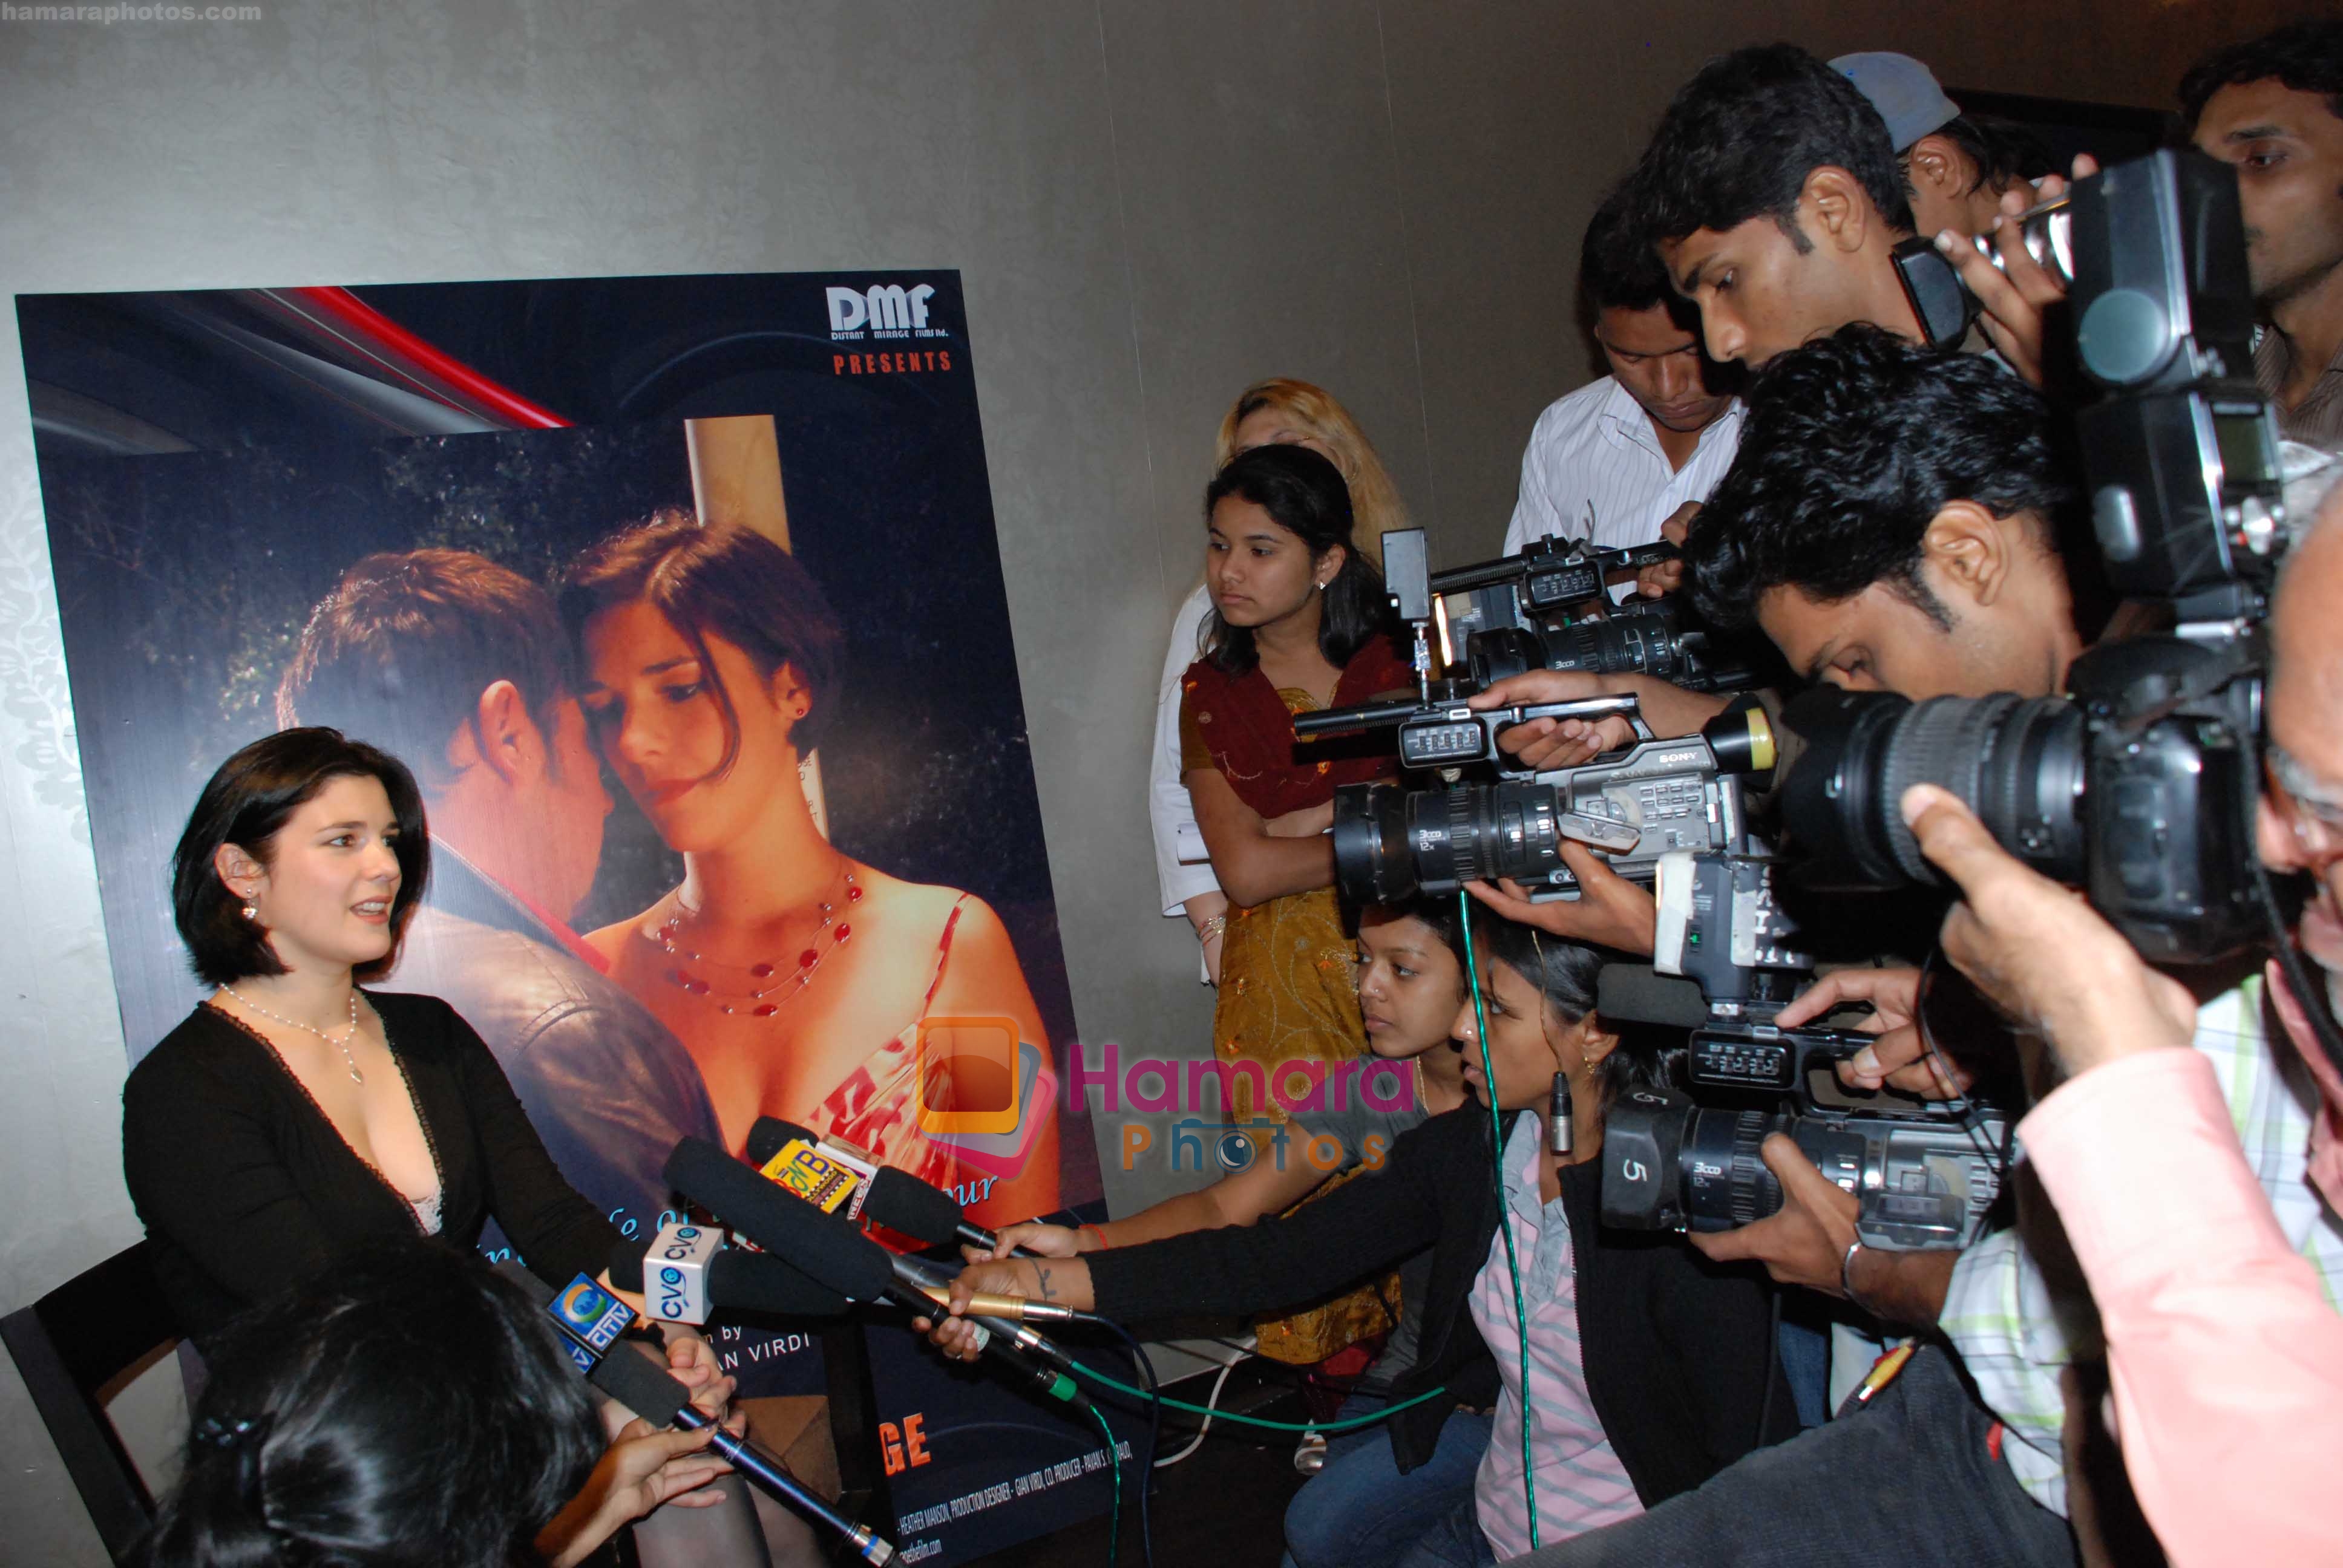 Jasmine at the Press Meet of IFilm A Distant Mirage in D Ultimate Club on 18th Feb 2009 